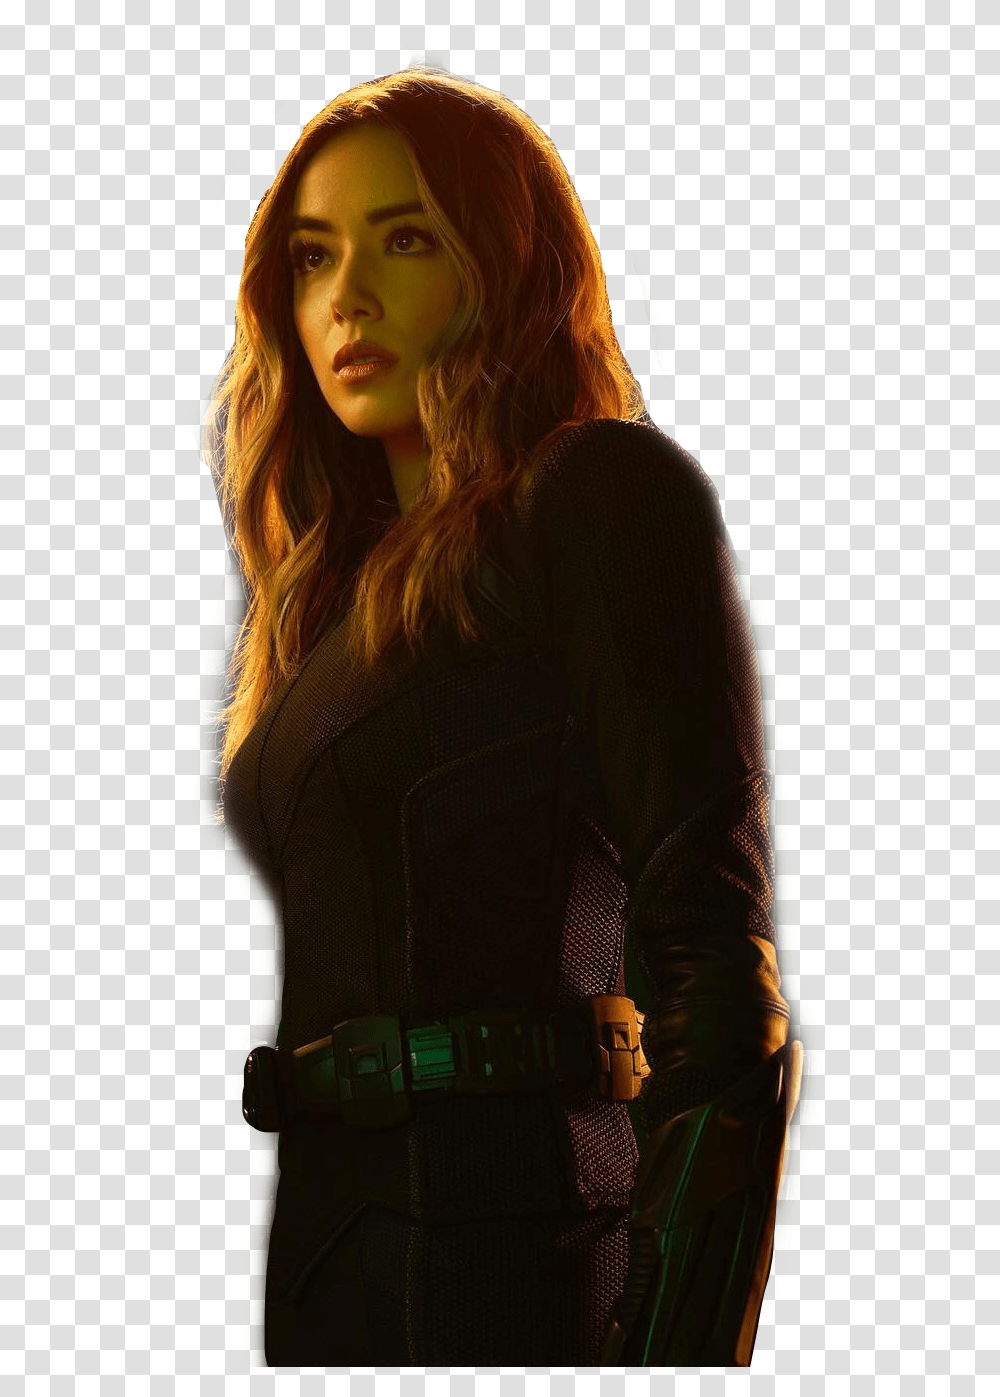 Chloebennet Daisyjohnson Freetoedit Agents Of Shield Season 6 Posters, Sleeve, Person, Female Transparent Png